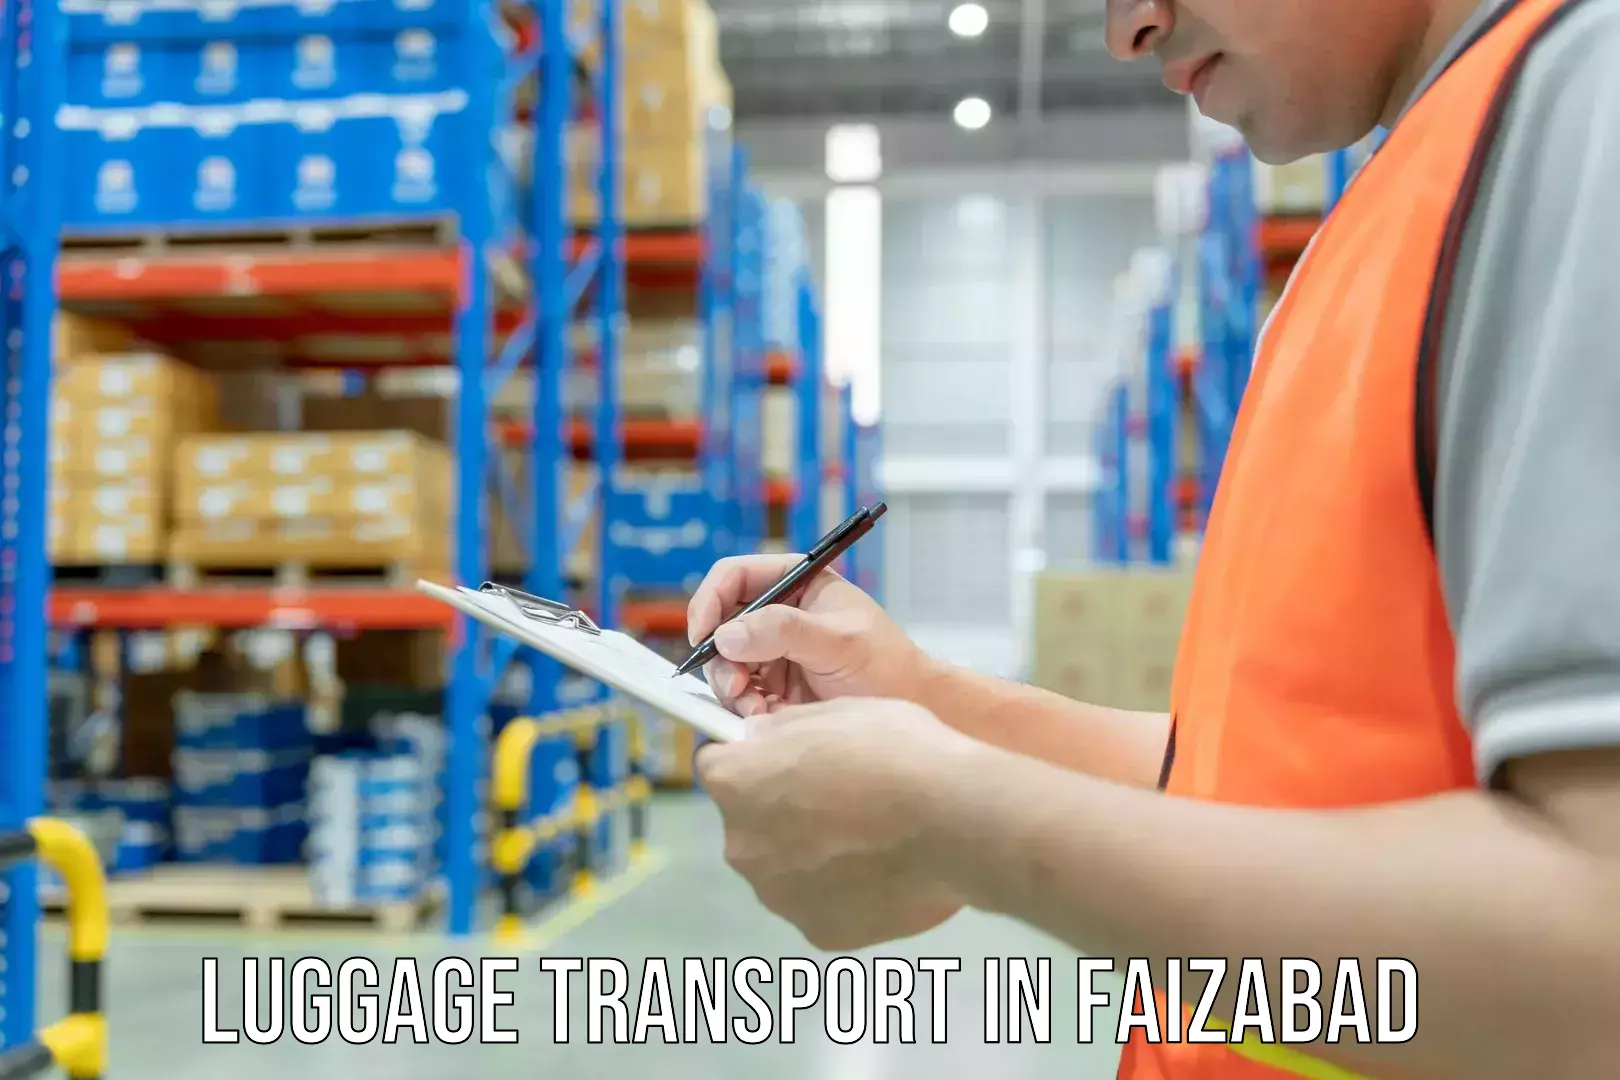 Baggage transport technology in Faizabad